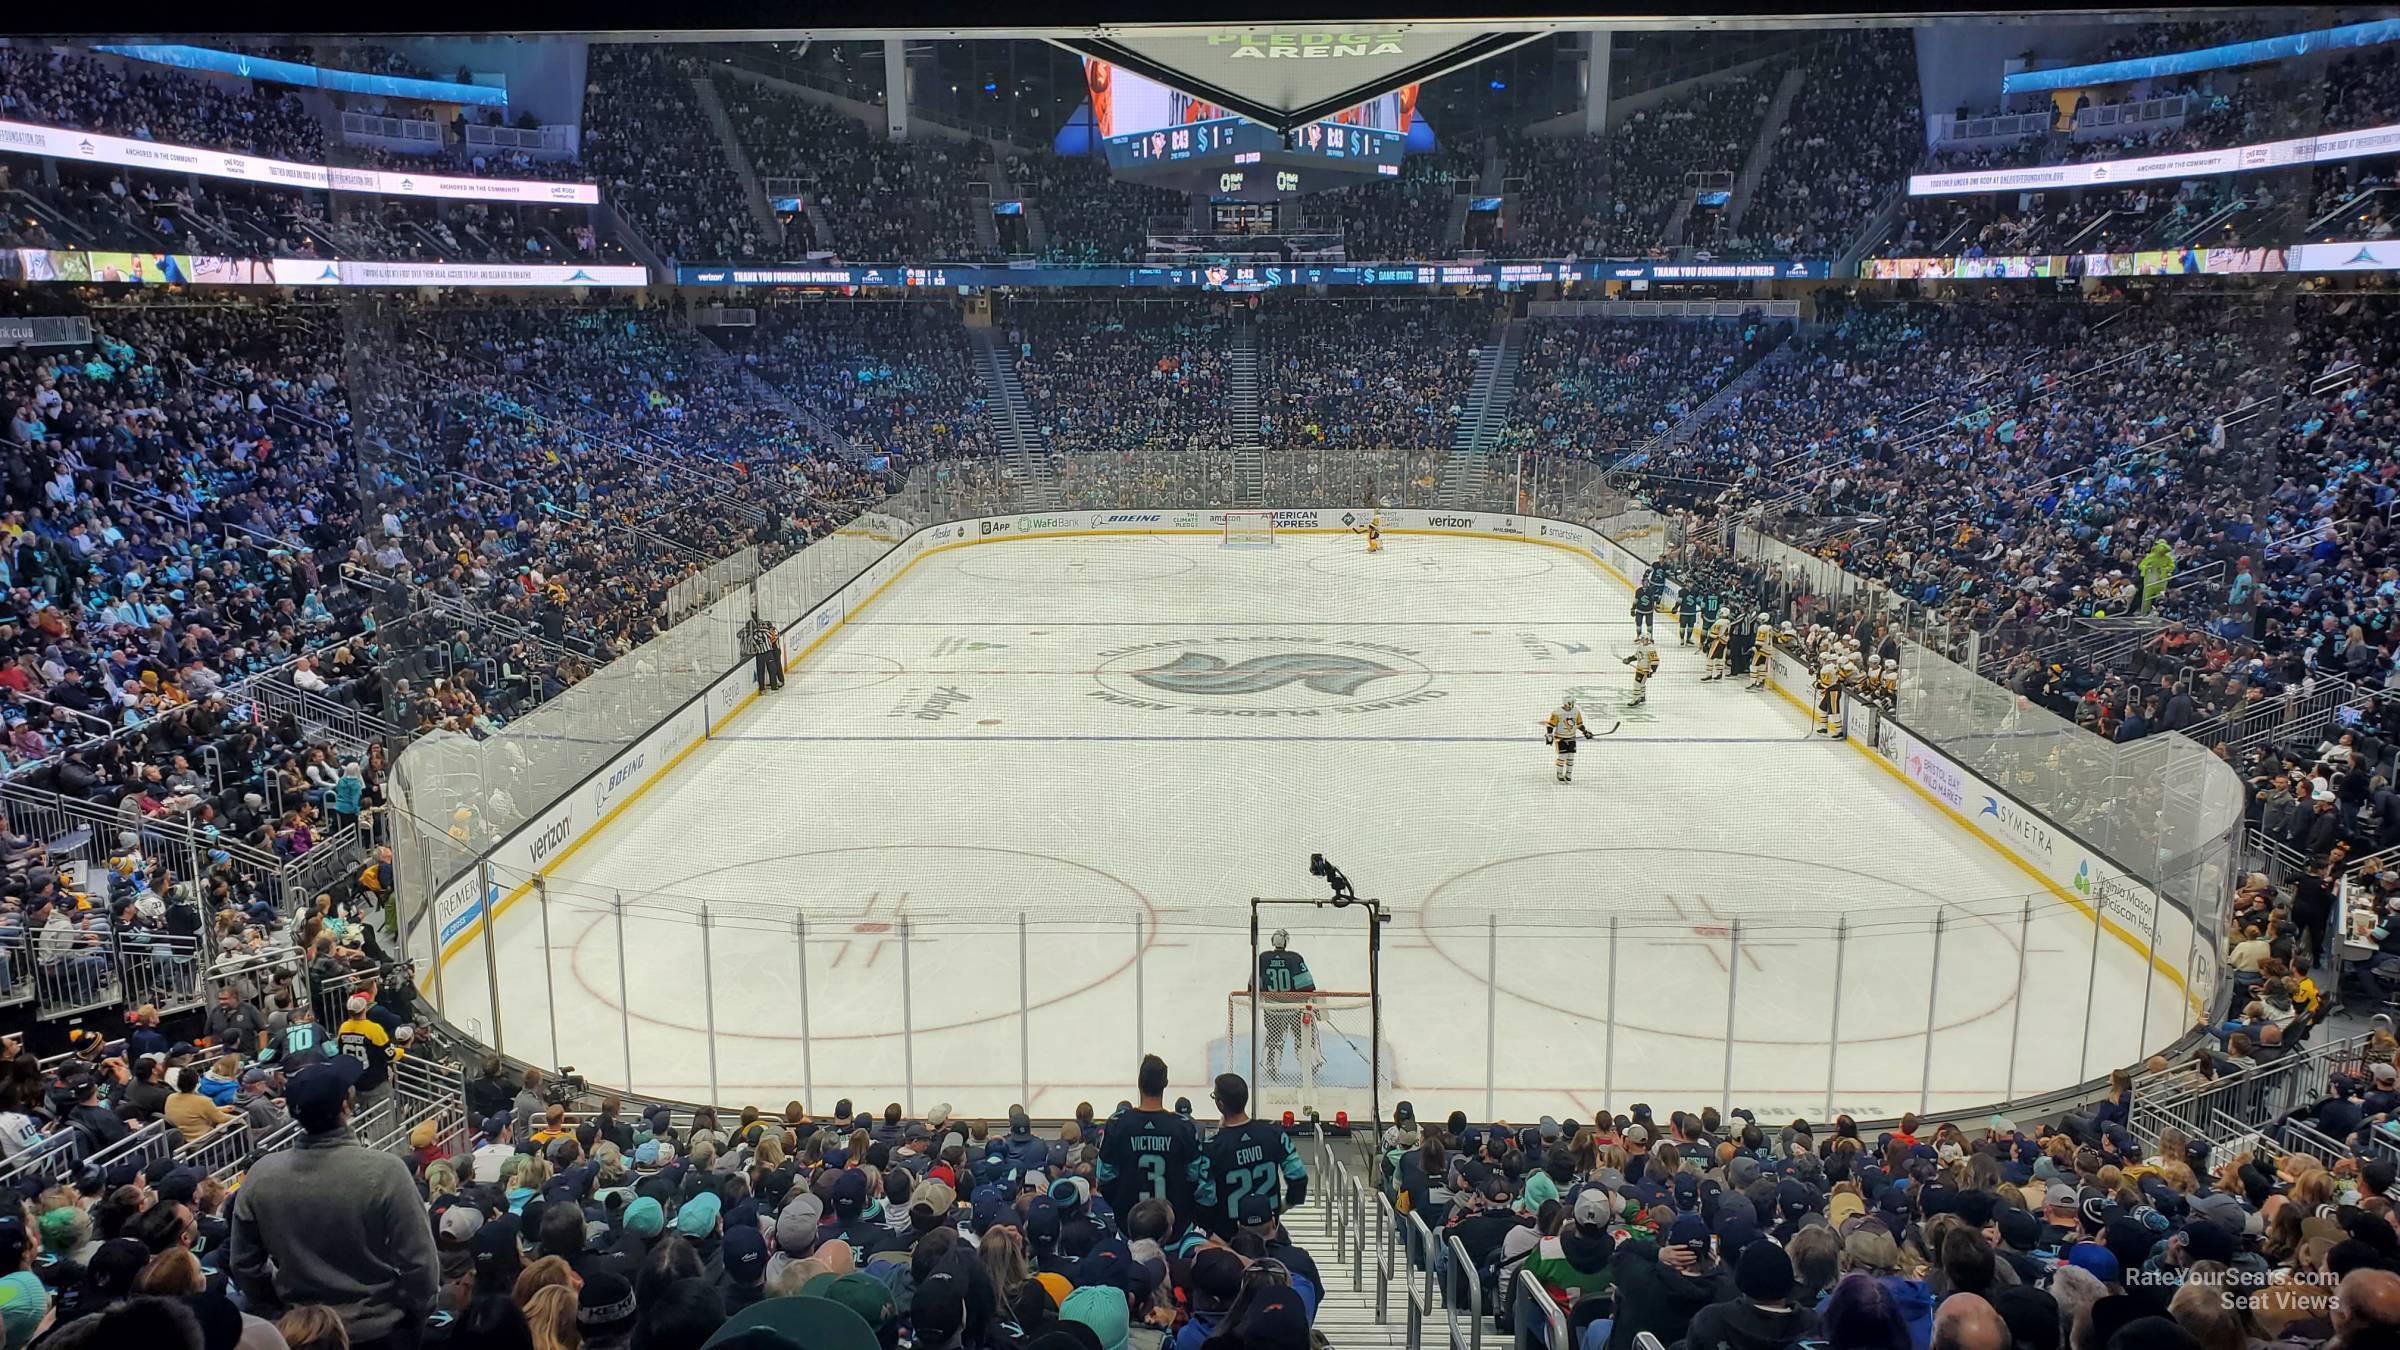 section 8, row bar seat view  for hockey - climate pledge arena